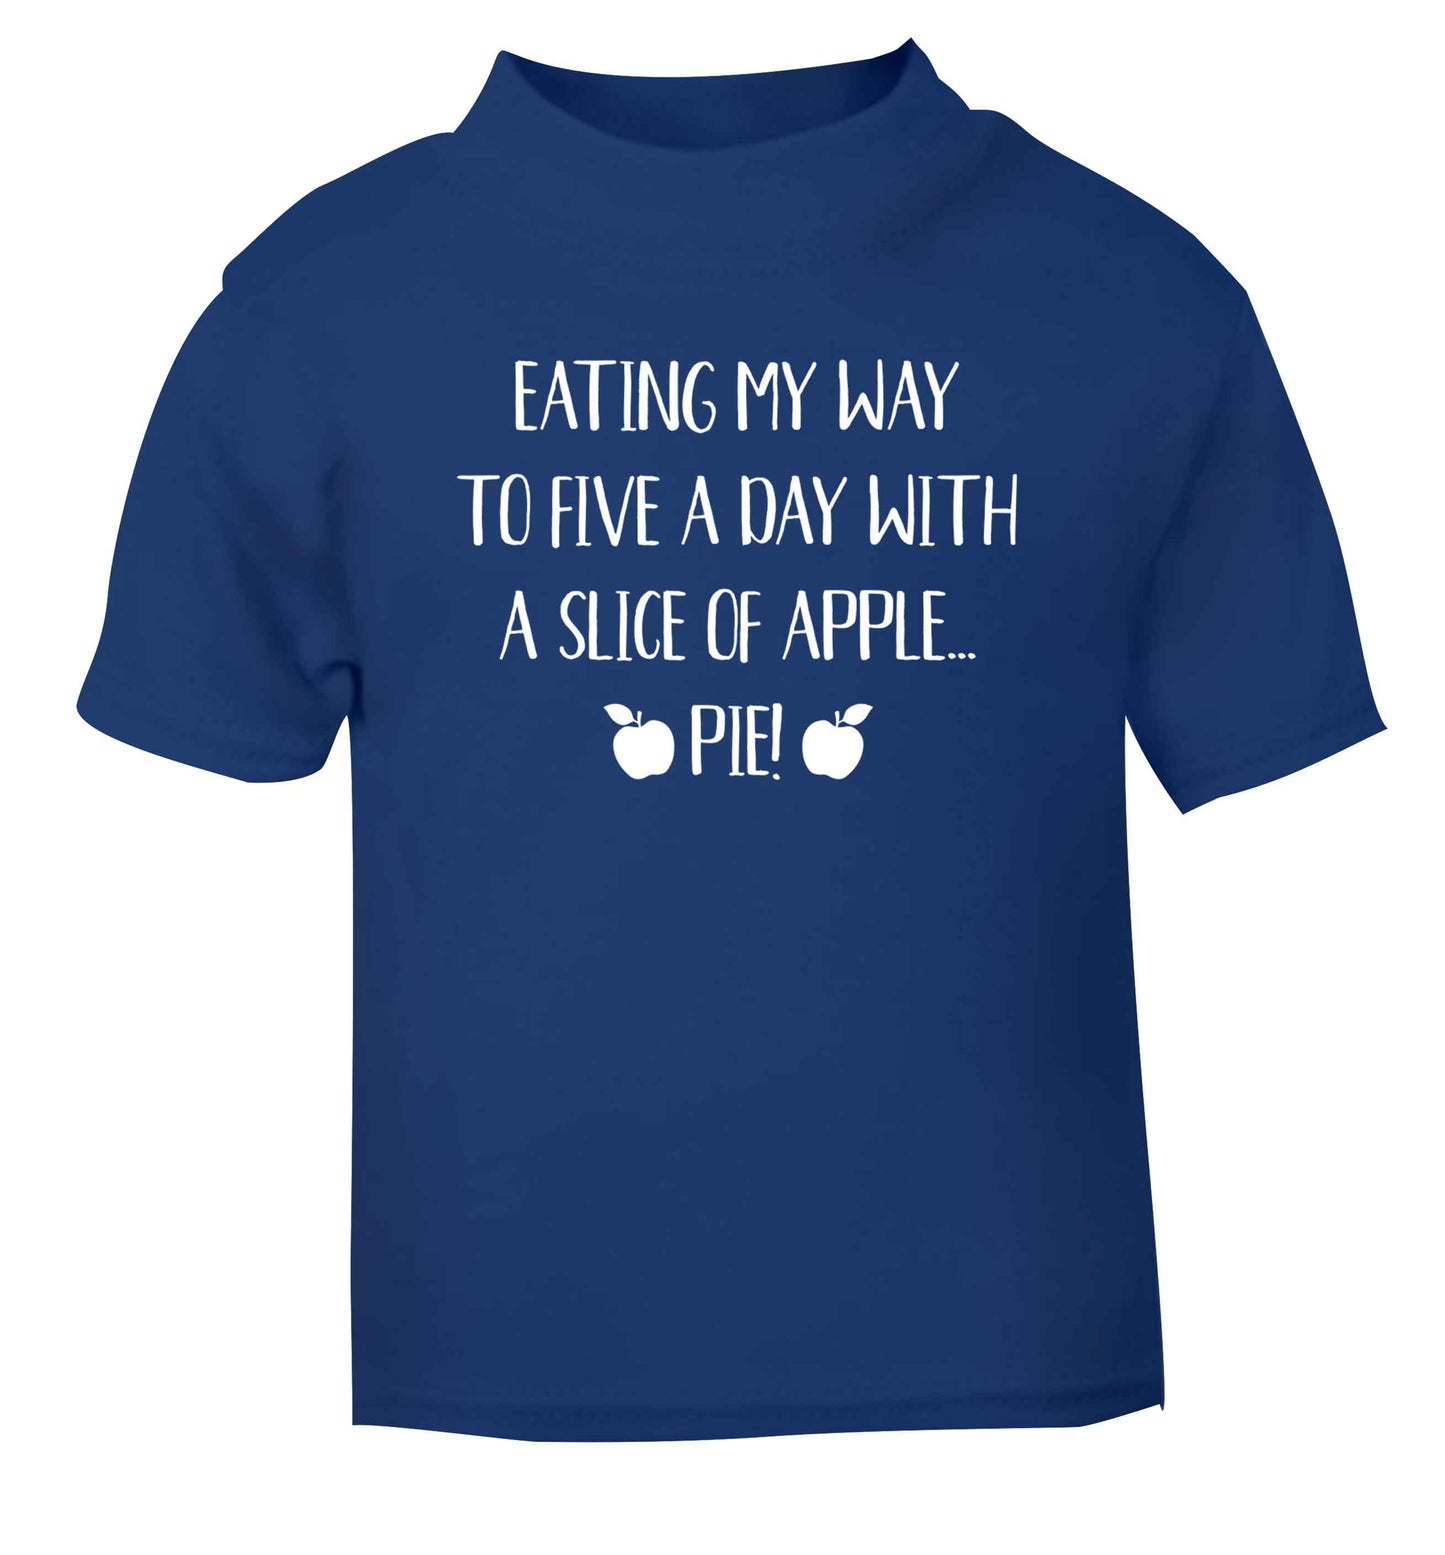 Eating my way to five a day with a slice of apple pie blue Baby Toddler Tshirt 2 Years